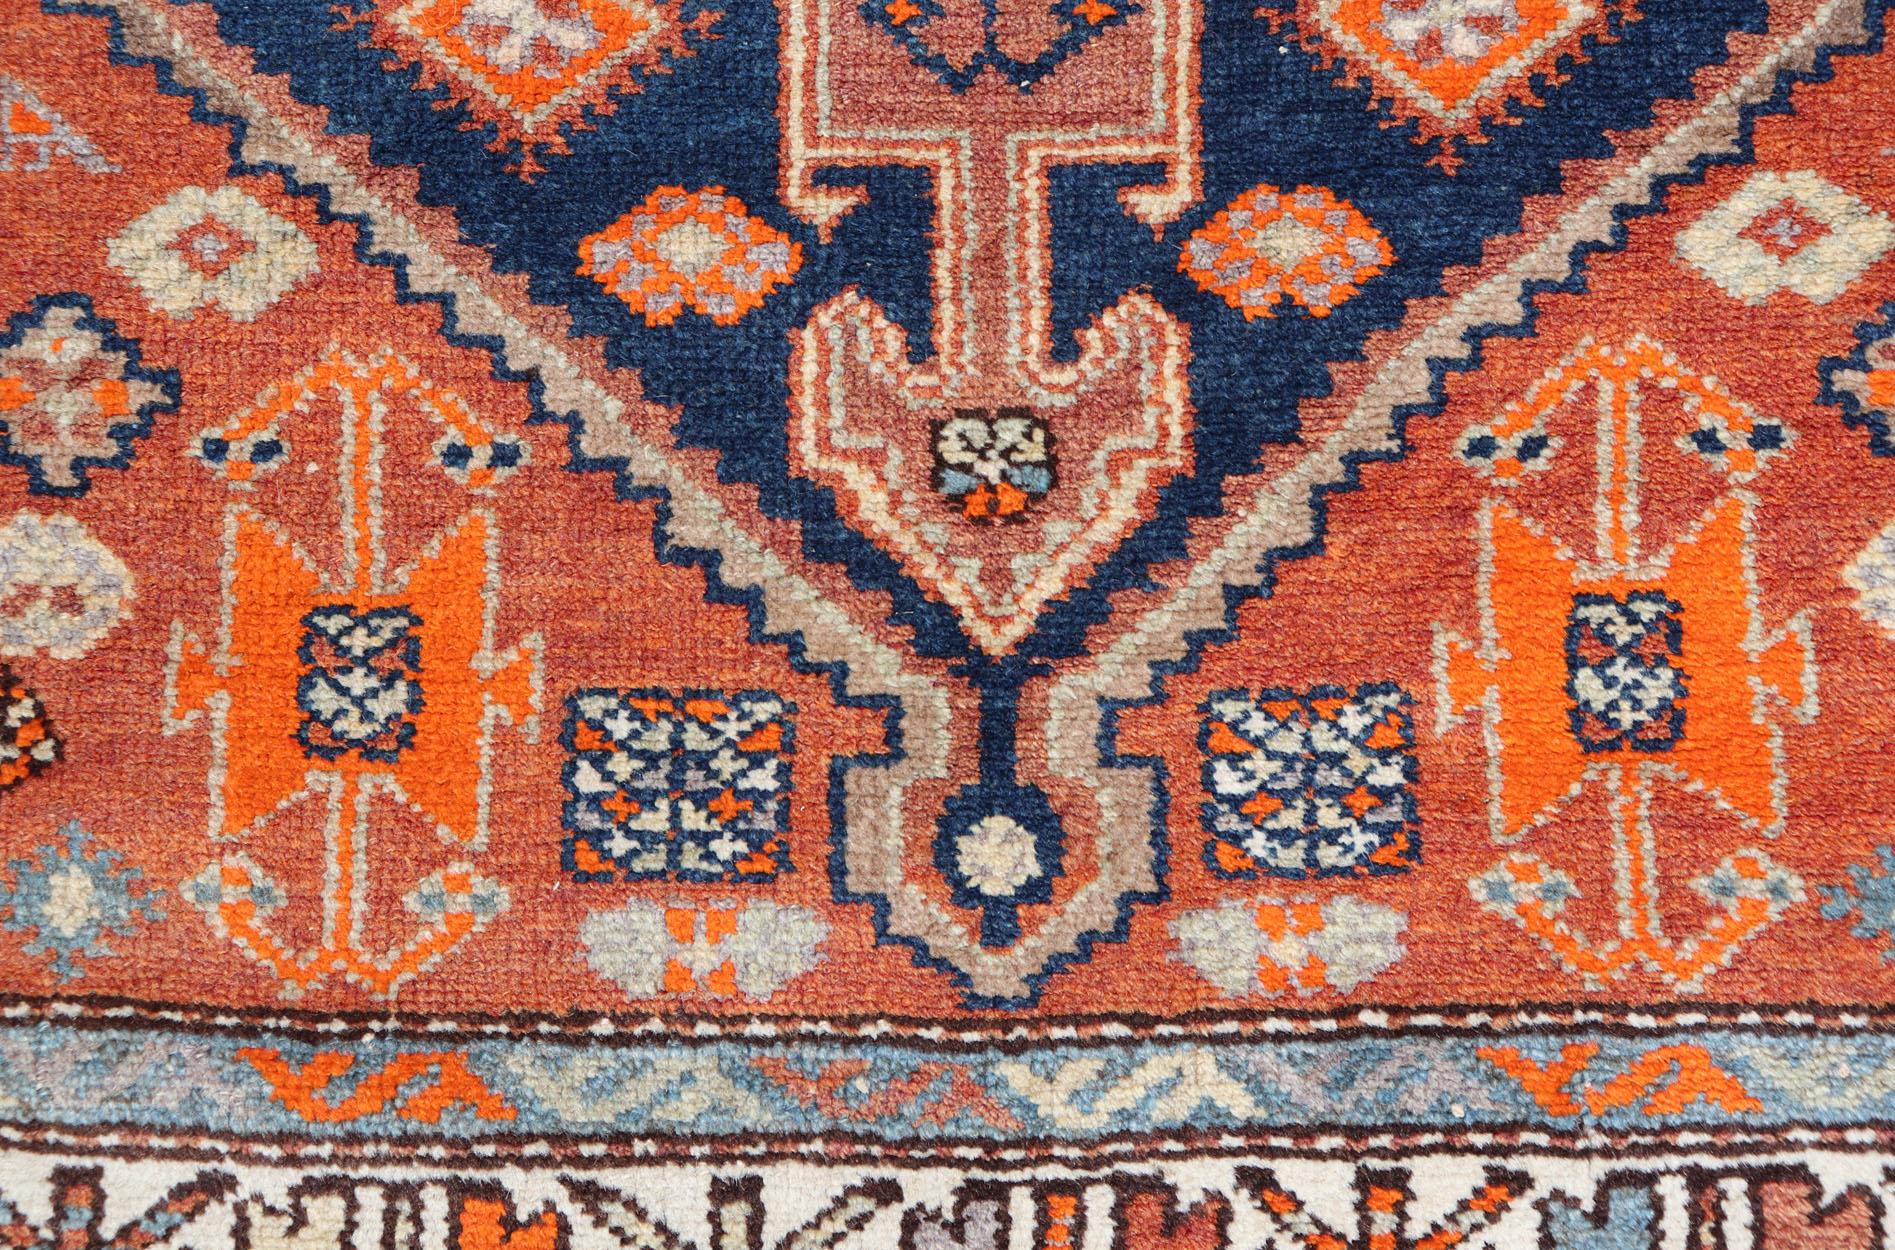 Malayer vintage runner from Persia with geometric medallion central field design, Keivan Woven Arts / rug PTA-200732, country of origin / type: Iran / Malayer, circa 1930.

Measures: 3'6 x 9'3.